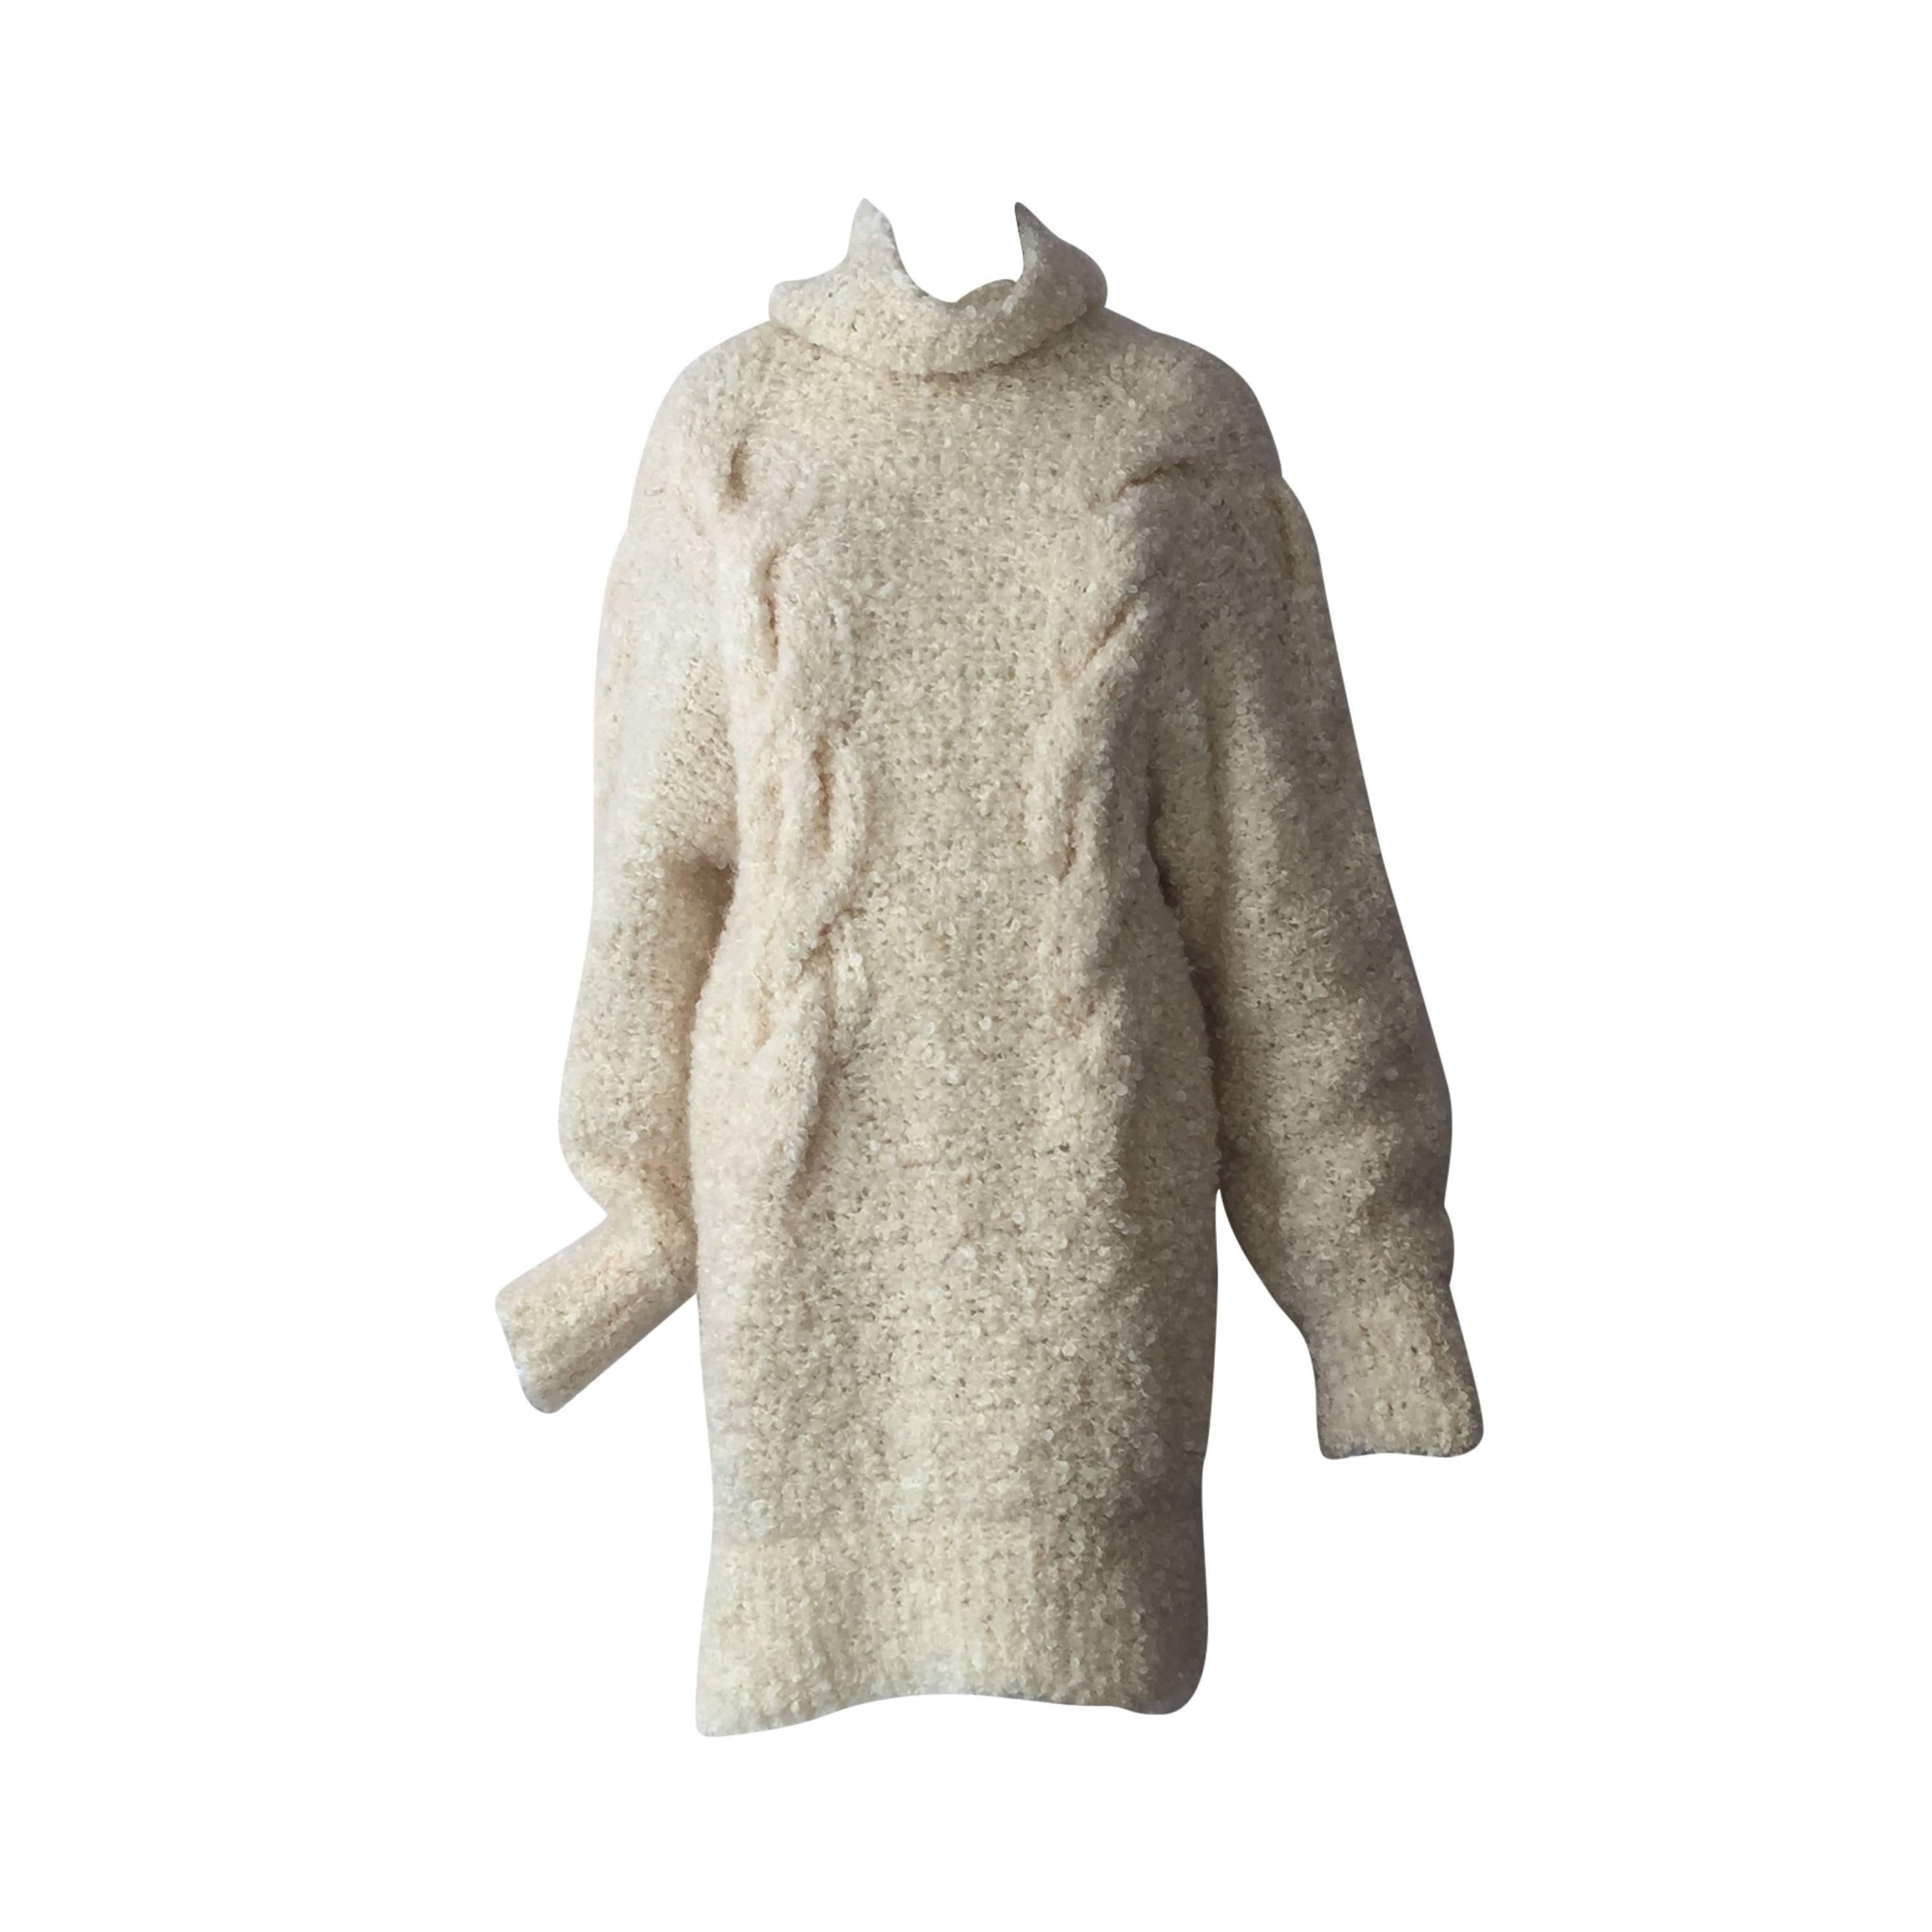 1990s Audrey Daniels Boucle Cable Knit Sweater Dress in Ivory Wool